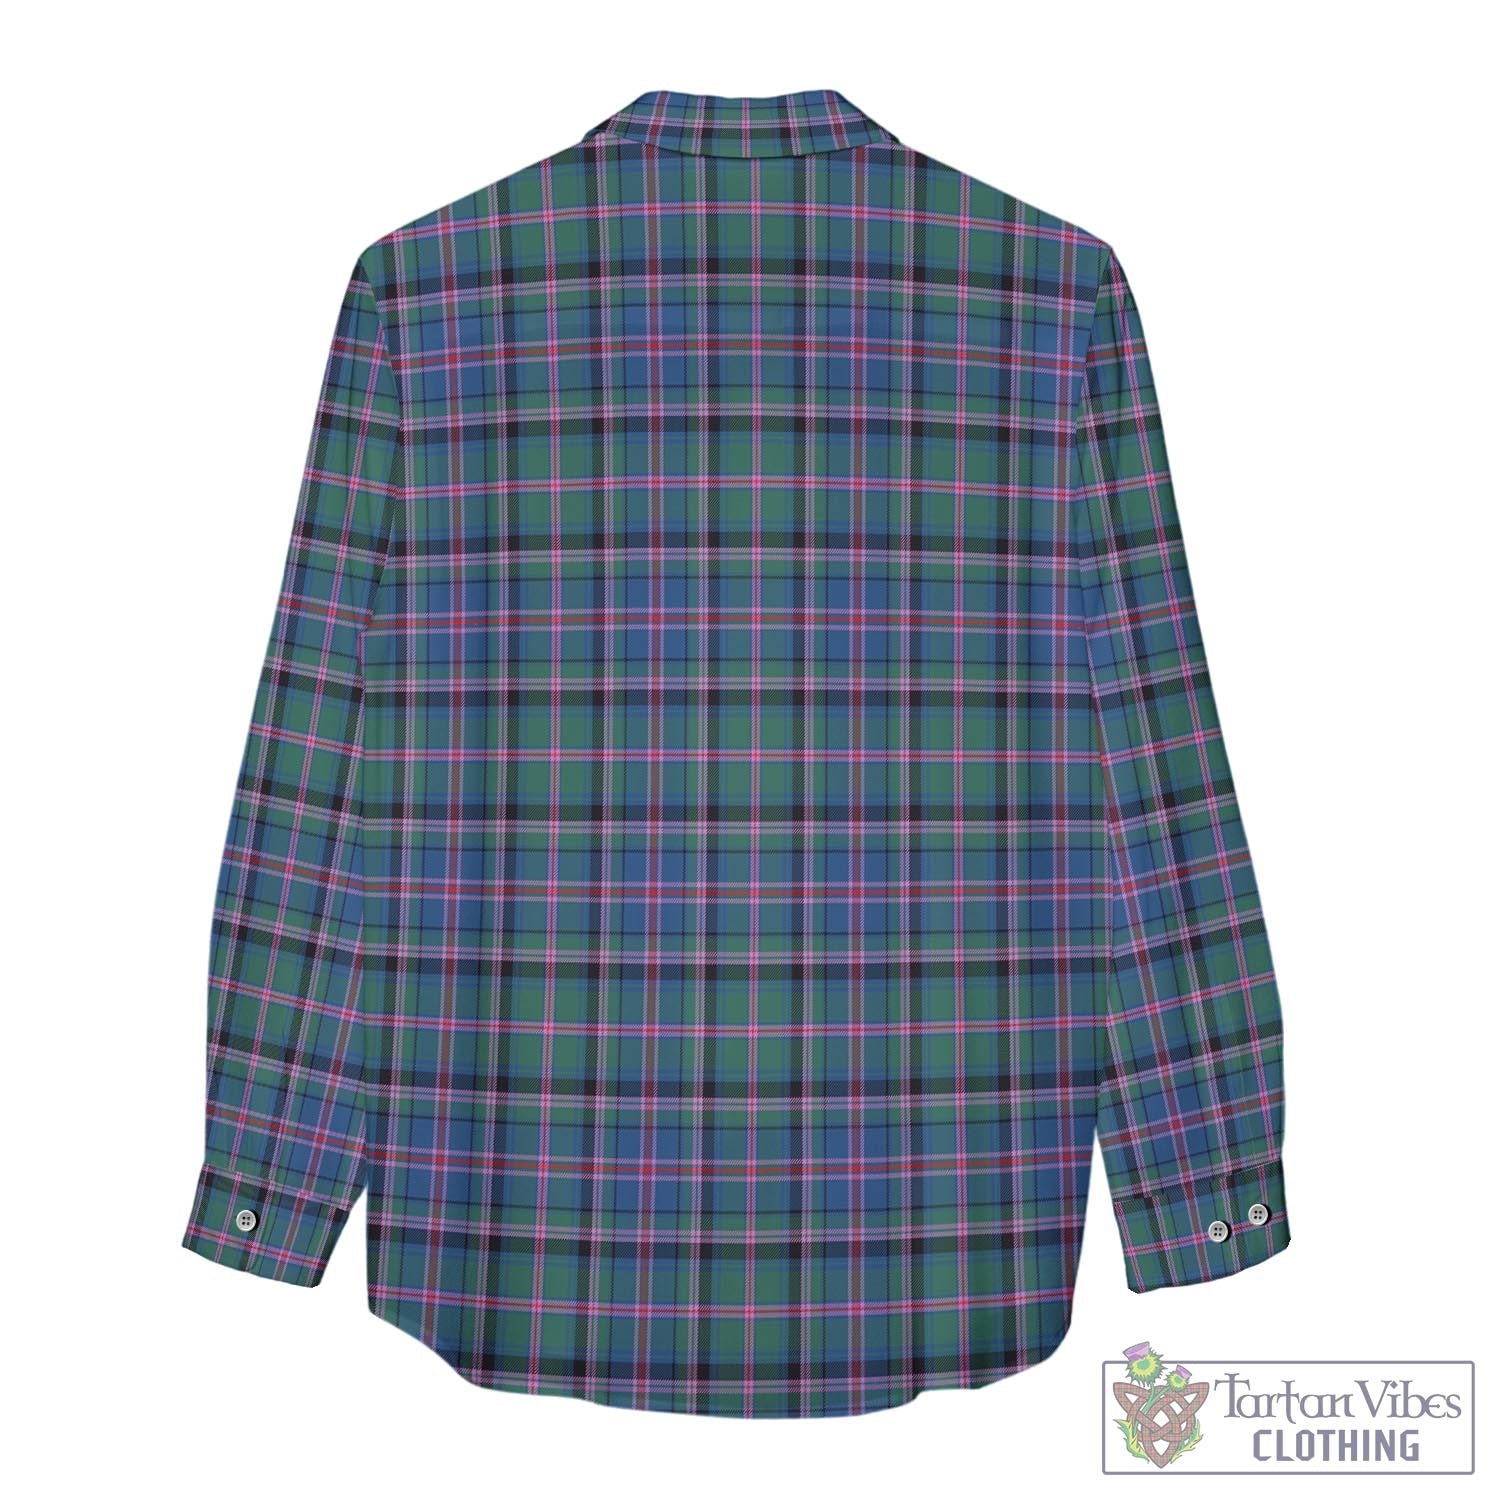 Tartan Vibes Clothing Cooper Tartan Womens Casual Shirt with Family Crest